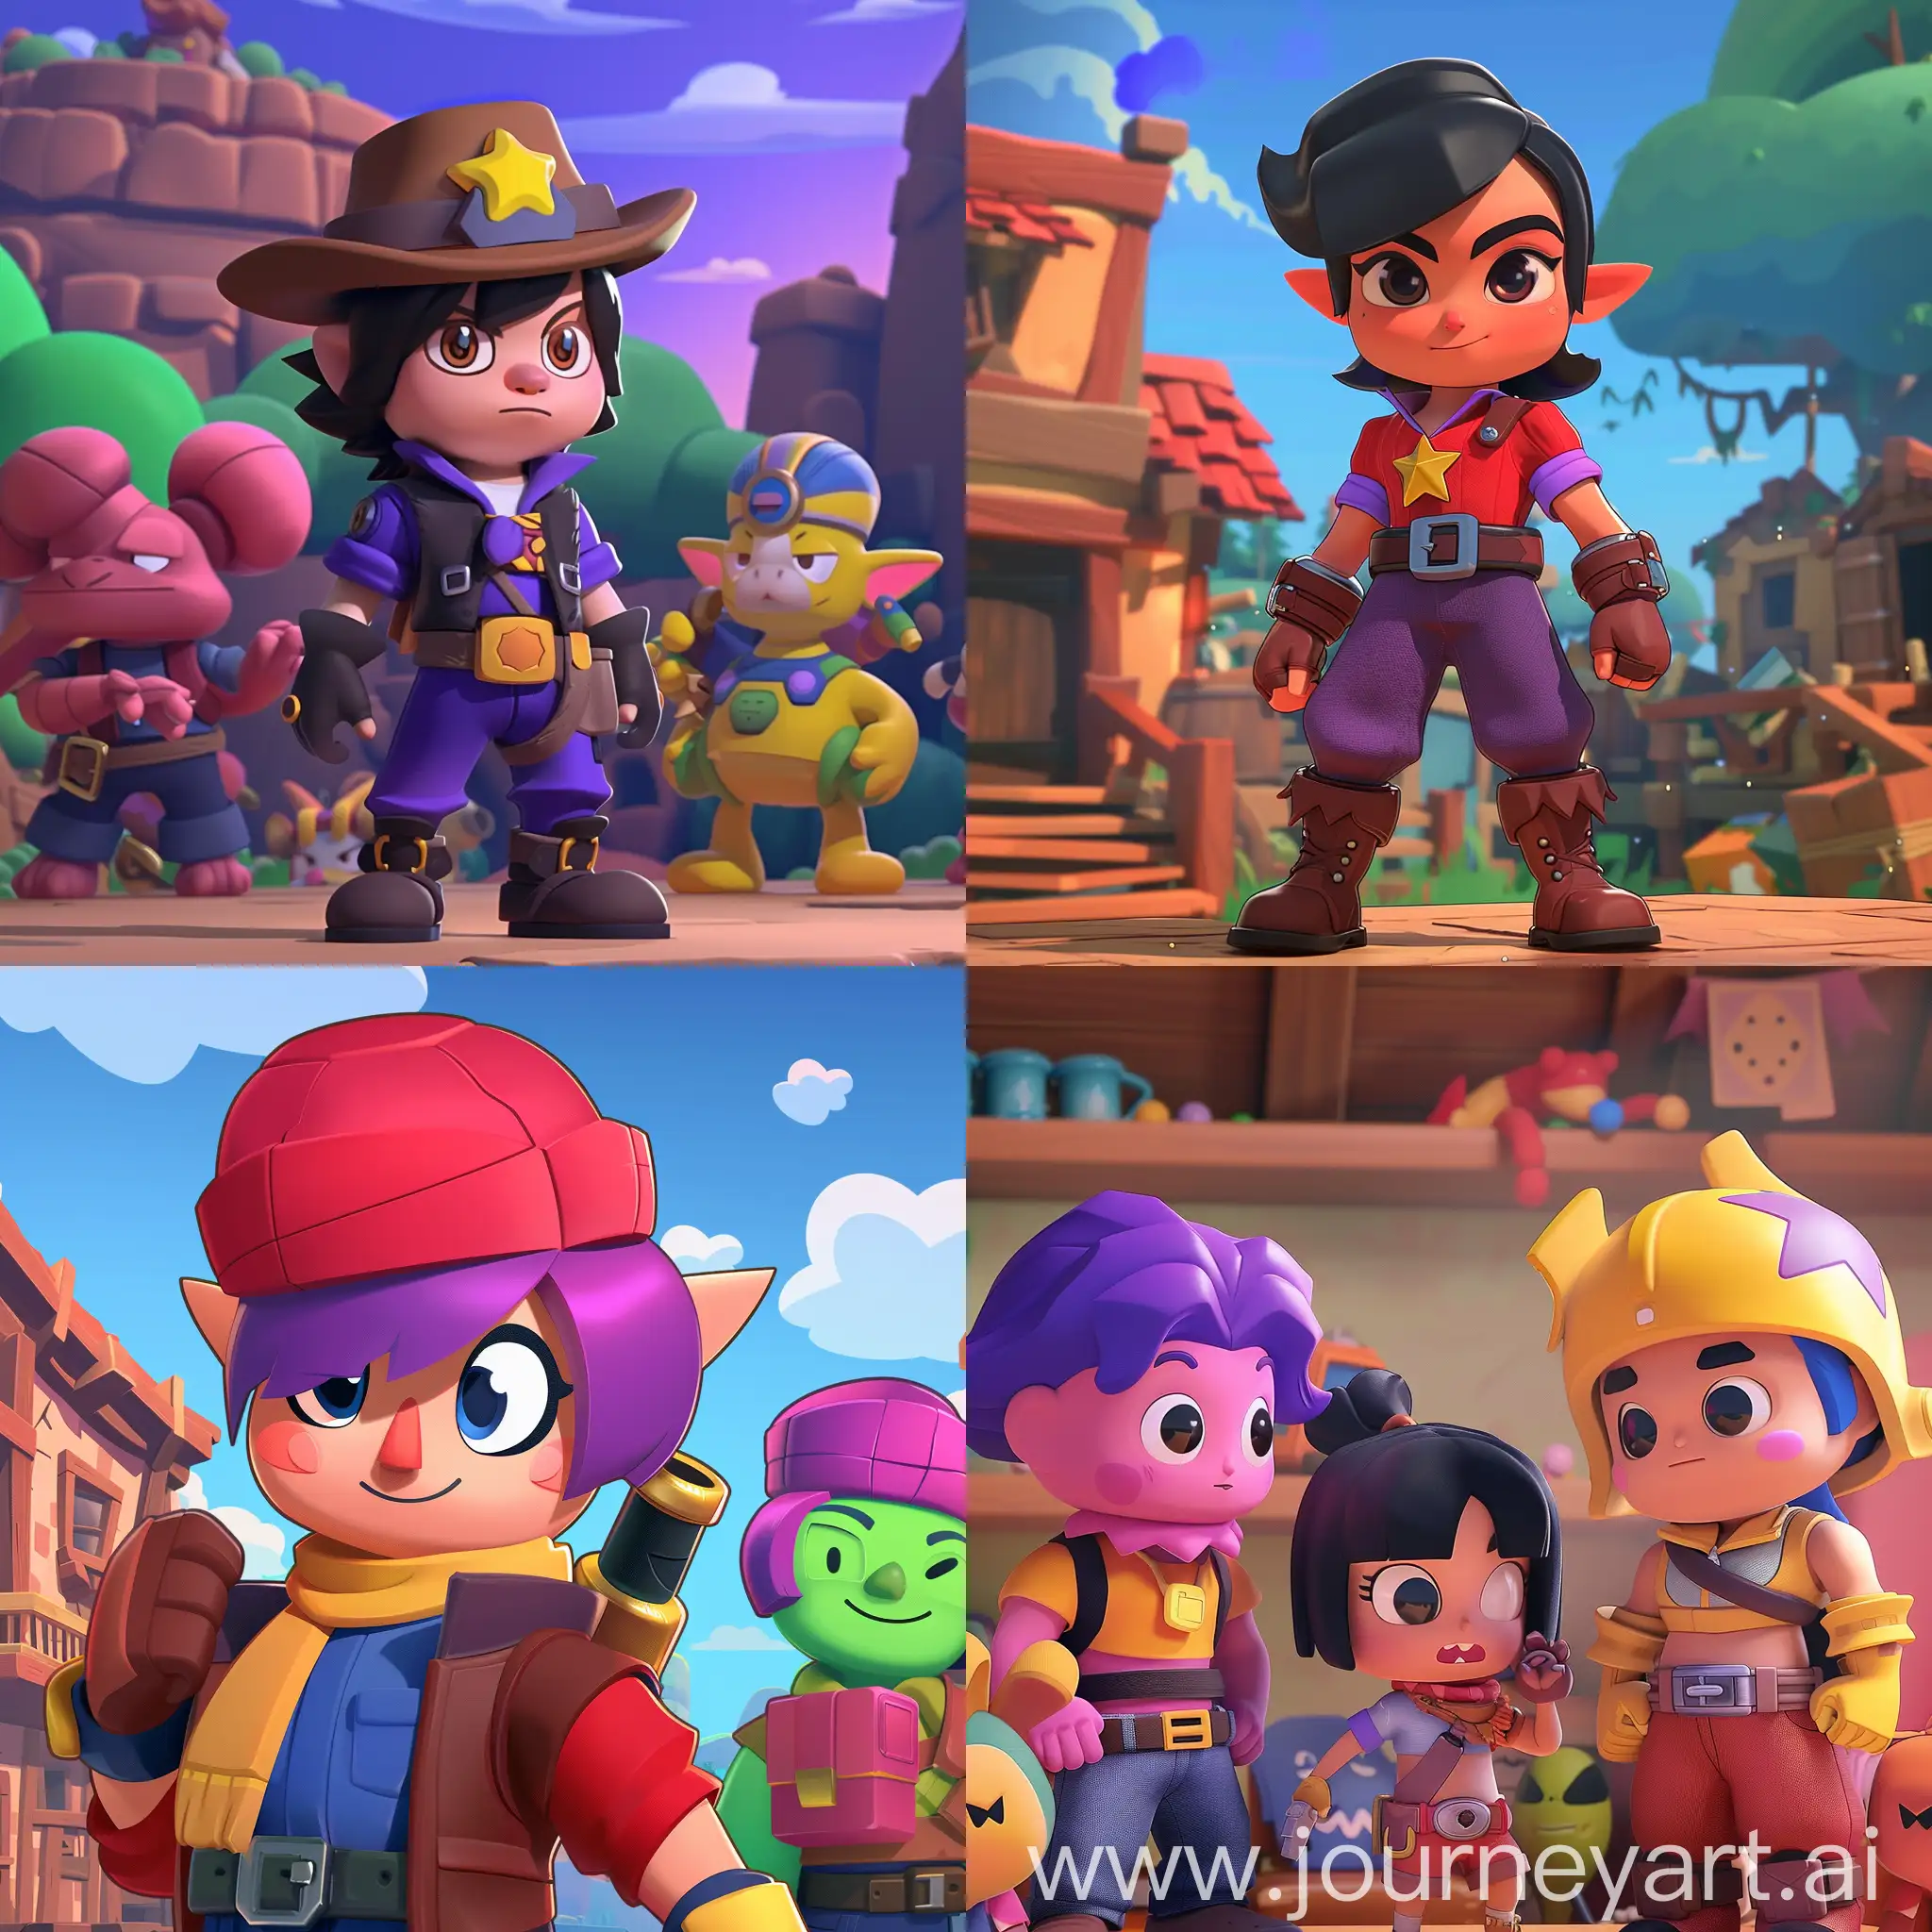 Dynamic-Brawl-Stars-Style-Battle-Scene-with-Characters